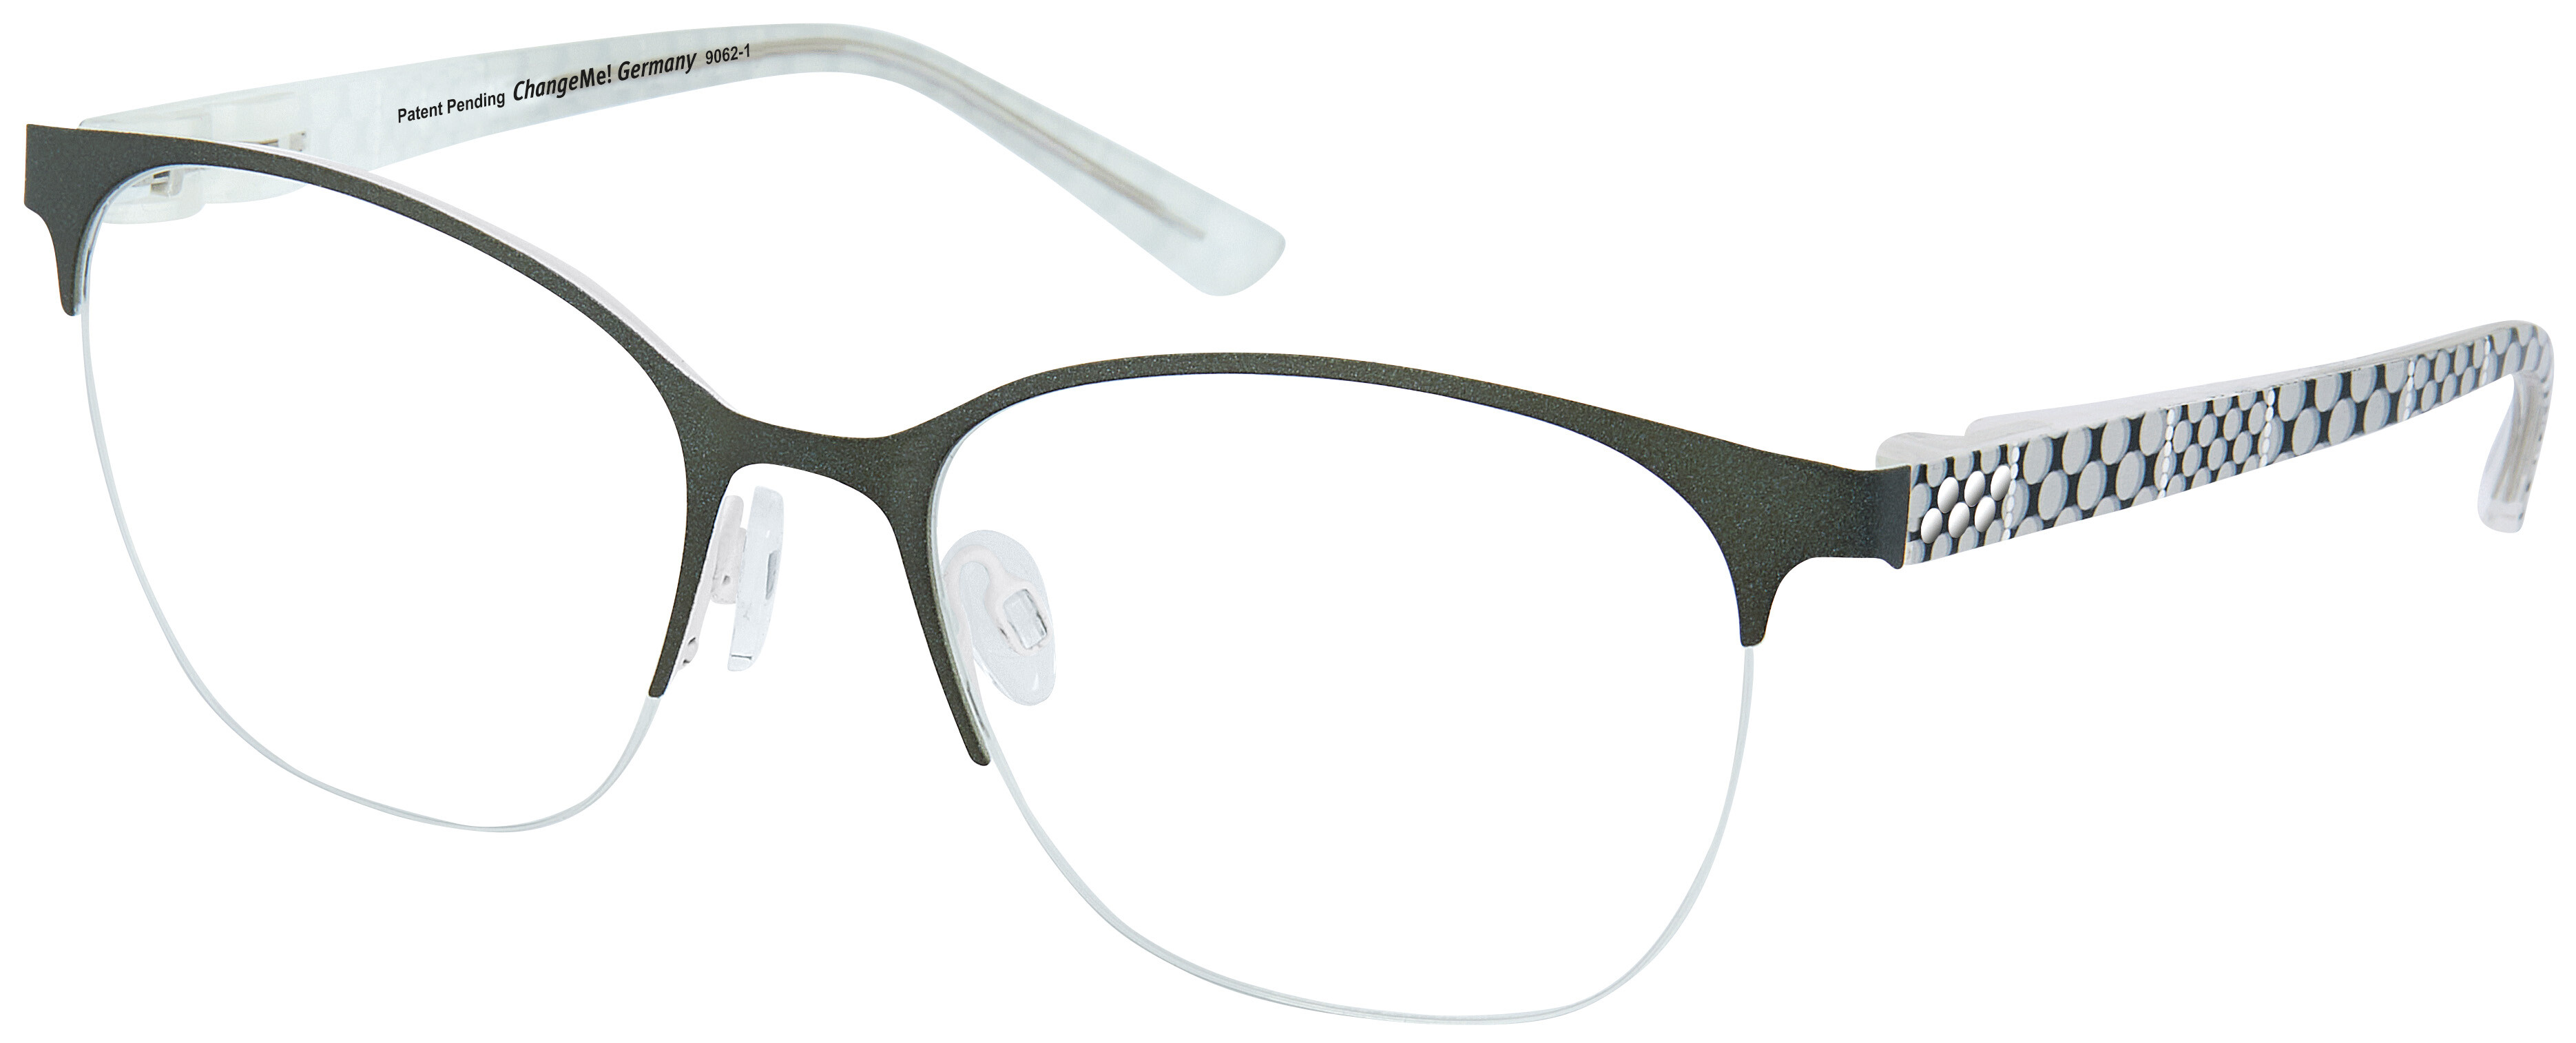 Angle_Left01 ChangeMe! 2866 001 Brille Grau, Weiss